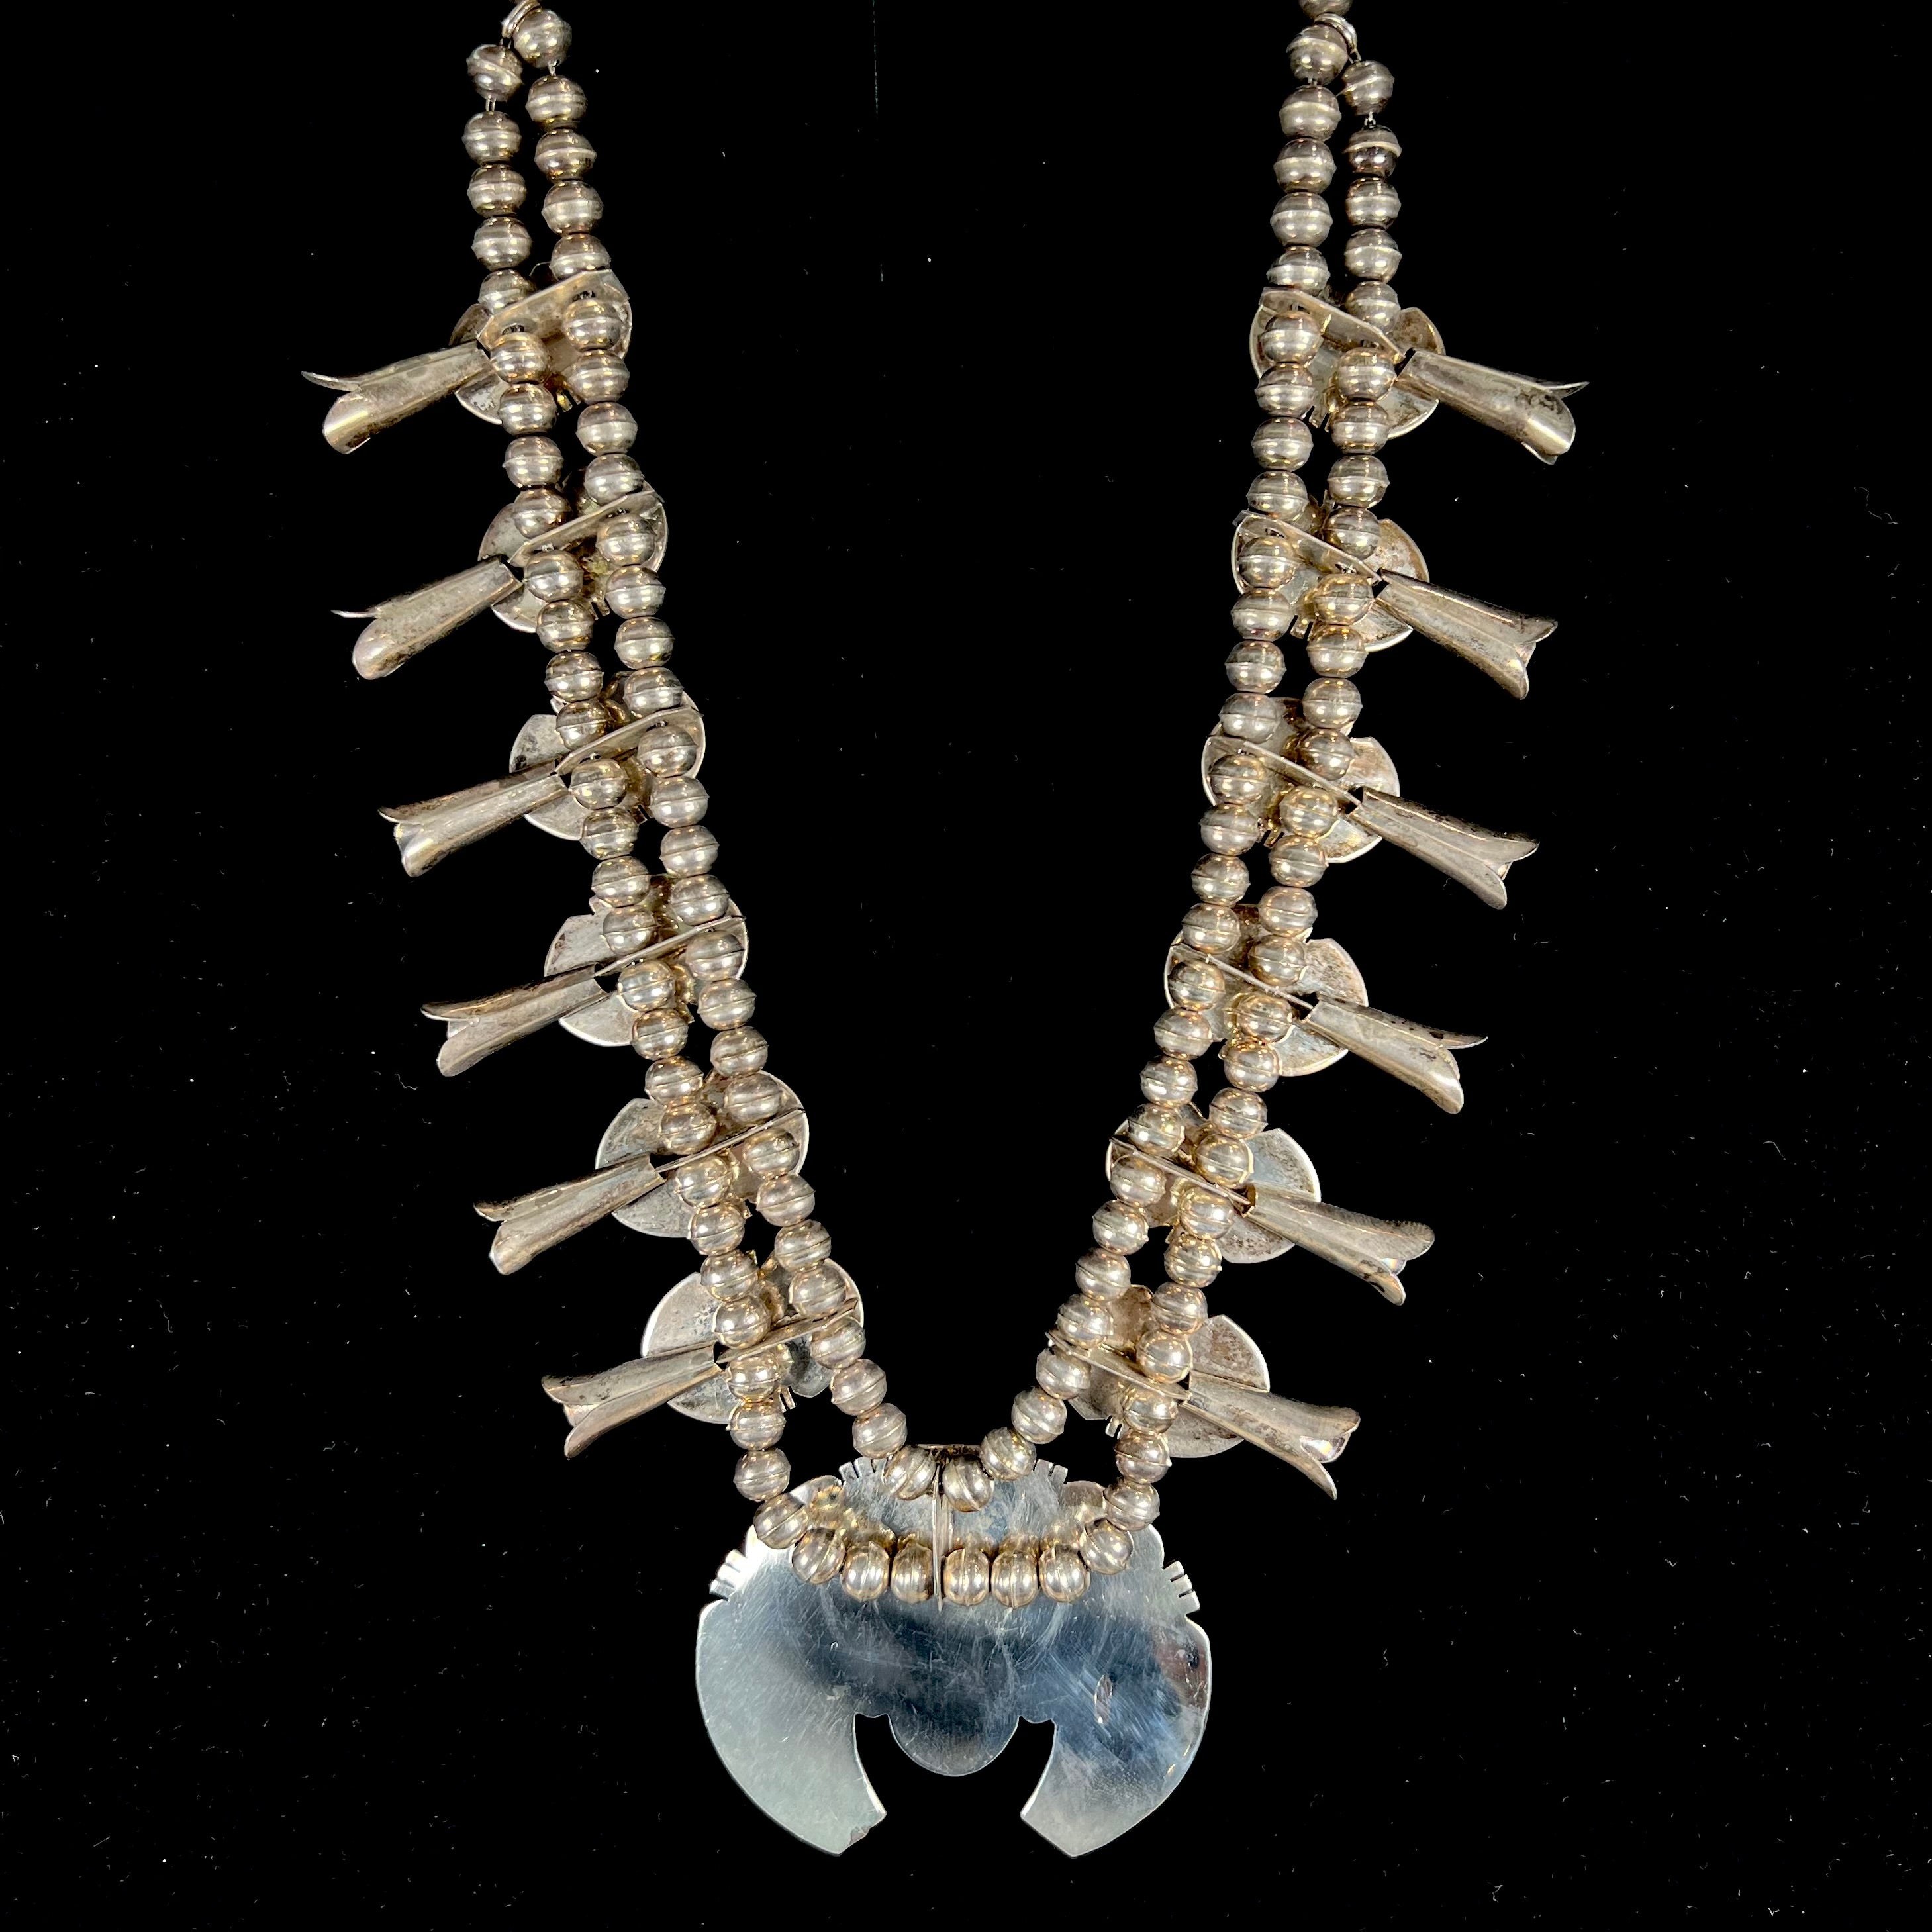 Sonoran Gold Turquoise Squash Blossom Necklace with Navajo Pearls –  Persimmon Hill at the National Cowboy & Western Heritage Museum